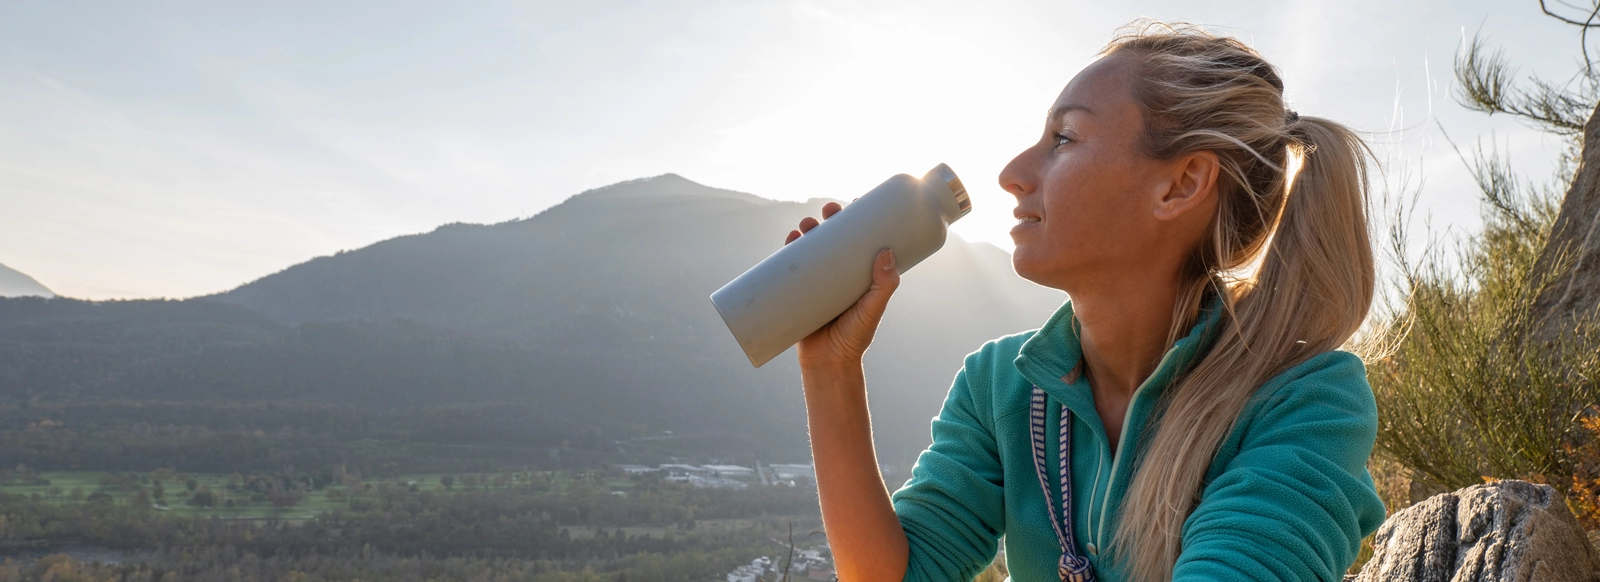 woman-with-reusable-water-bottle-1600x582.webp